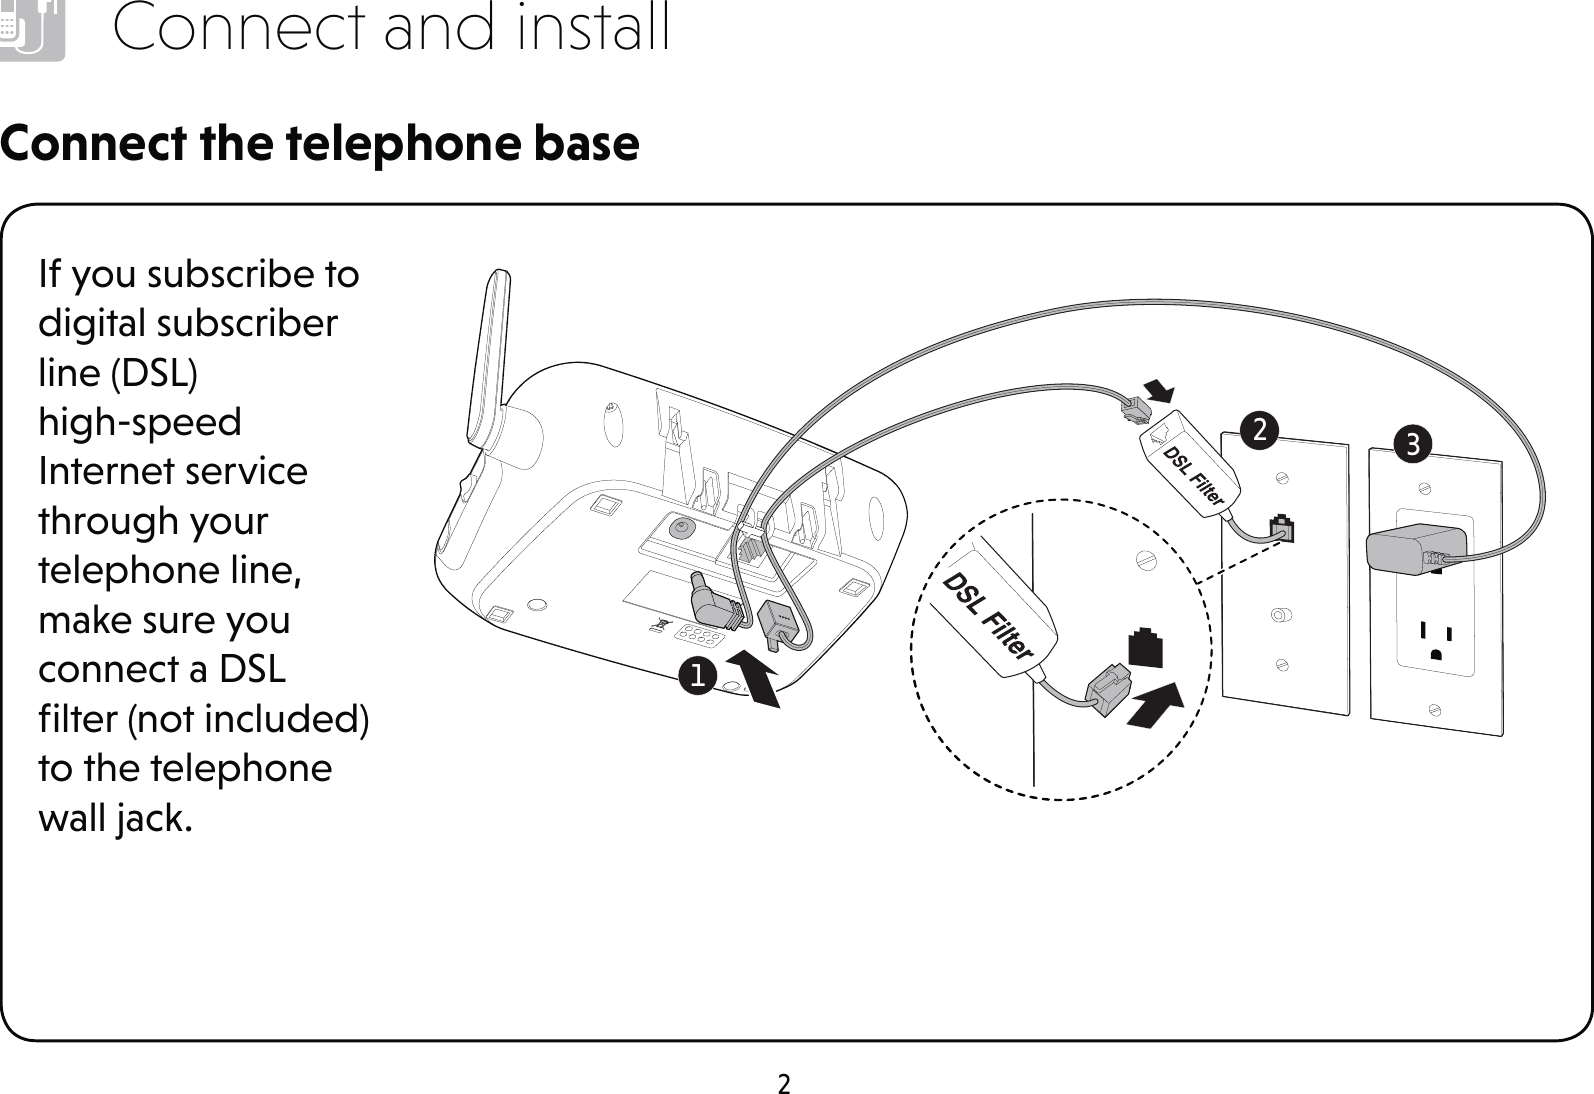 2Connect and installConnect the telephone baseIf you subscribe to digital subscriber line (DSL)  high-speed Internet service through your telephone line, make sure you connect a DSL ﬁlter (not included) to the telephone wall jack.231